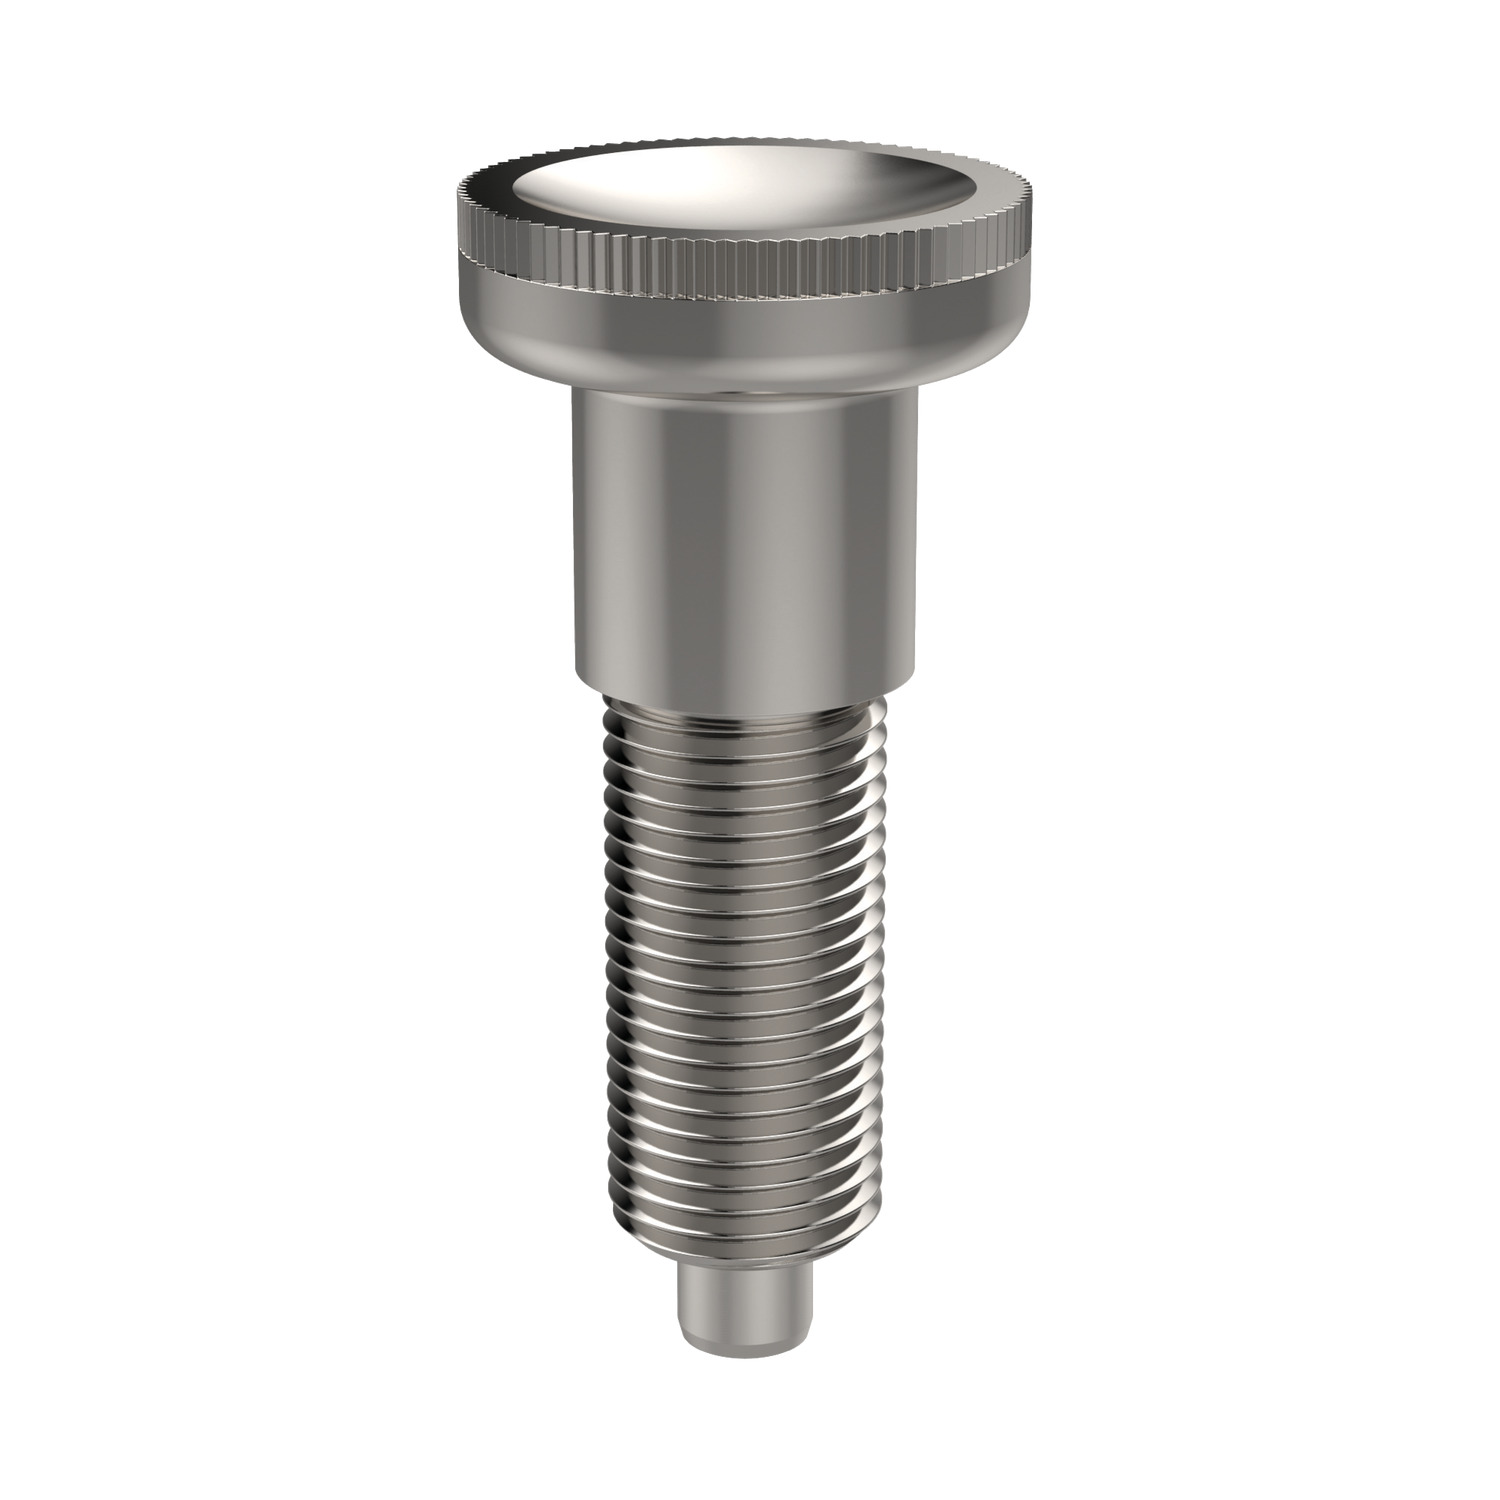 Index Plunger - Pull Grip An all stainless steel index plunger designed for spring-back location. Temperature resistance ranges from -30°C to +80°C.